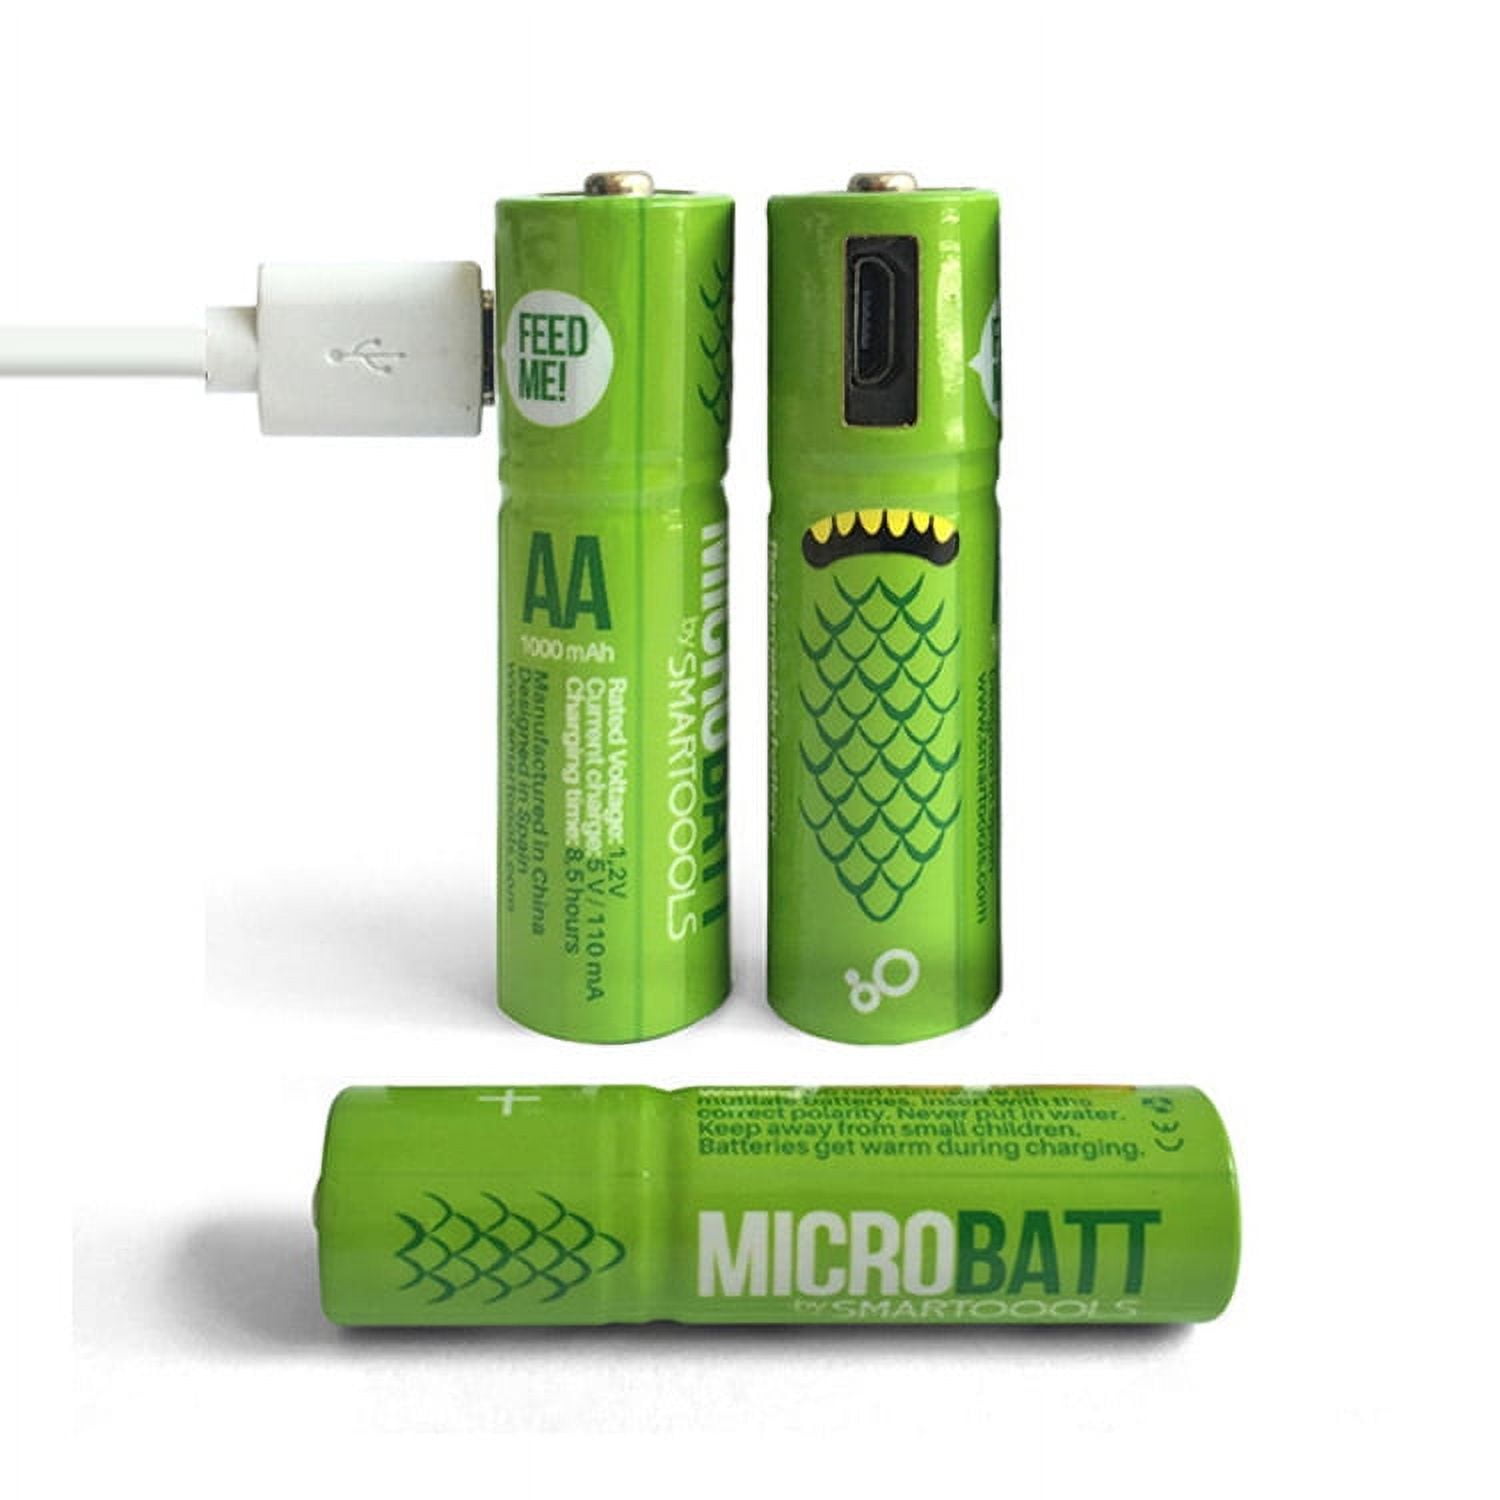 Smartoools USB Rechargeable Batteries 1.2V / 1000mAh Lithium Ion AA Battery  with Micro USB Charging Cable - 2 Pack